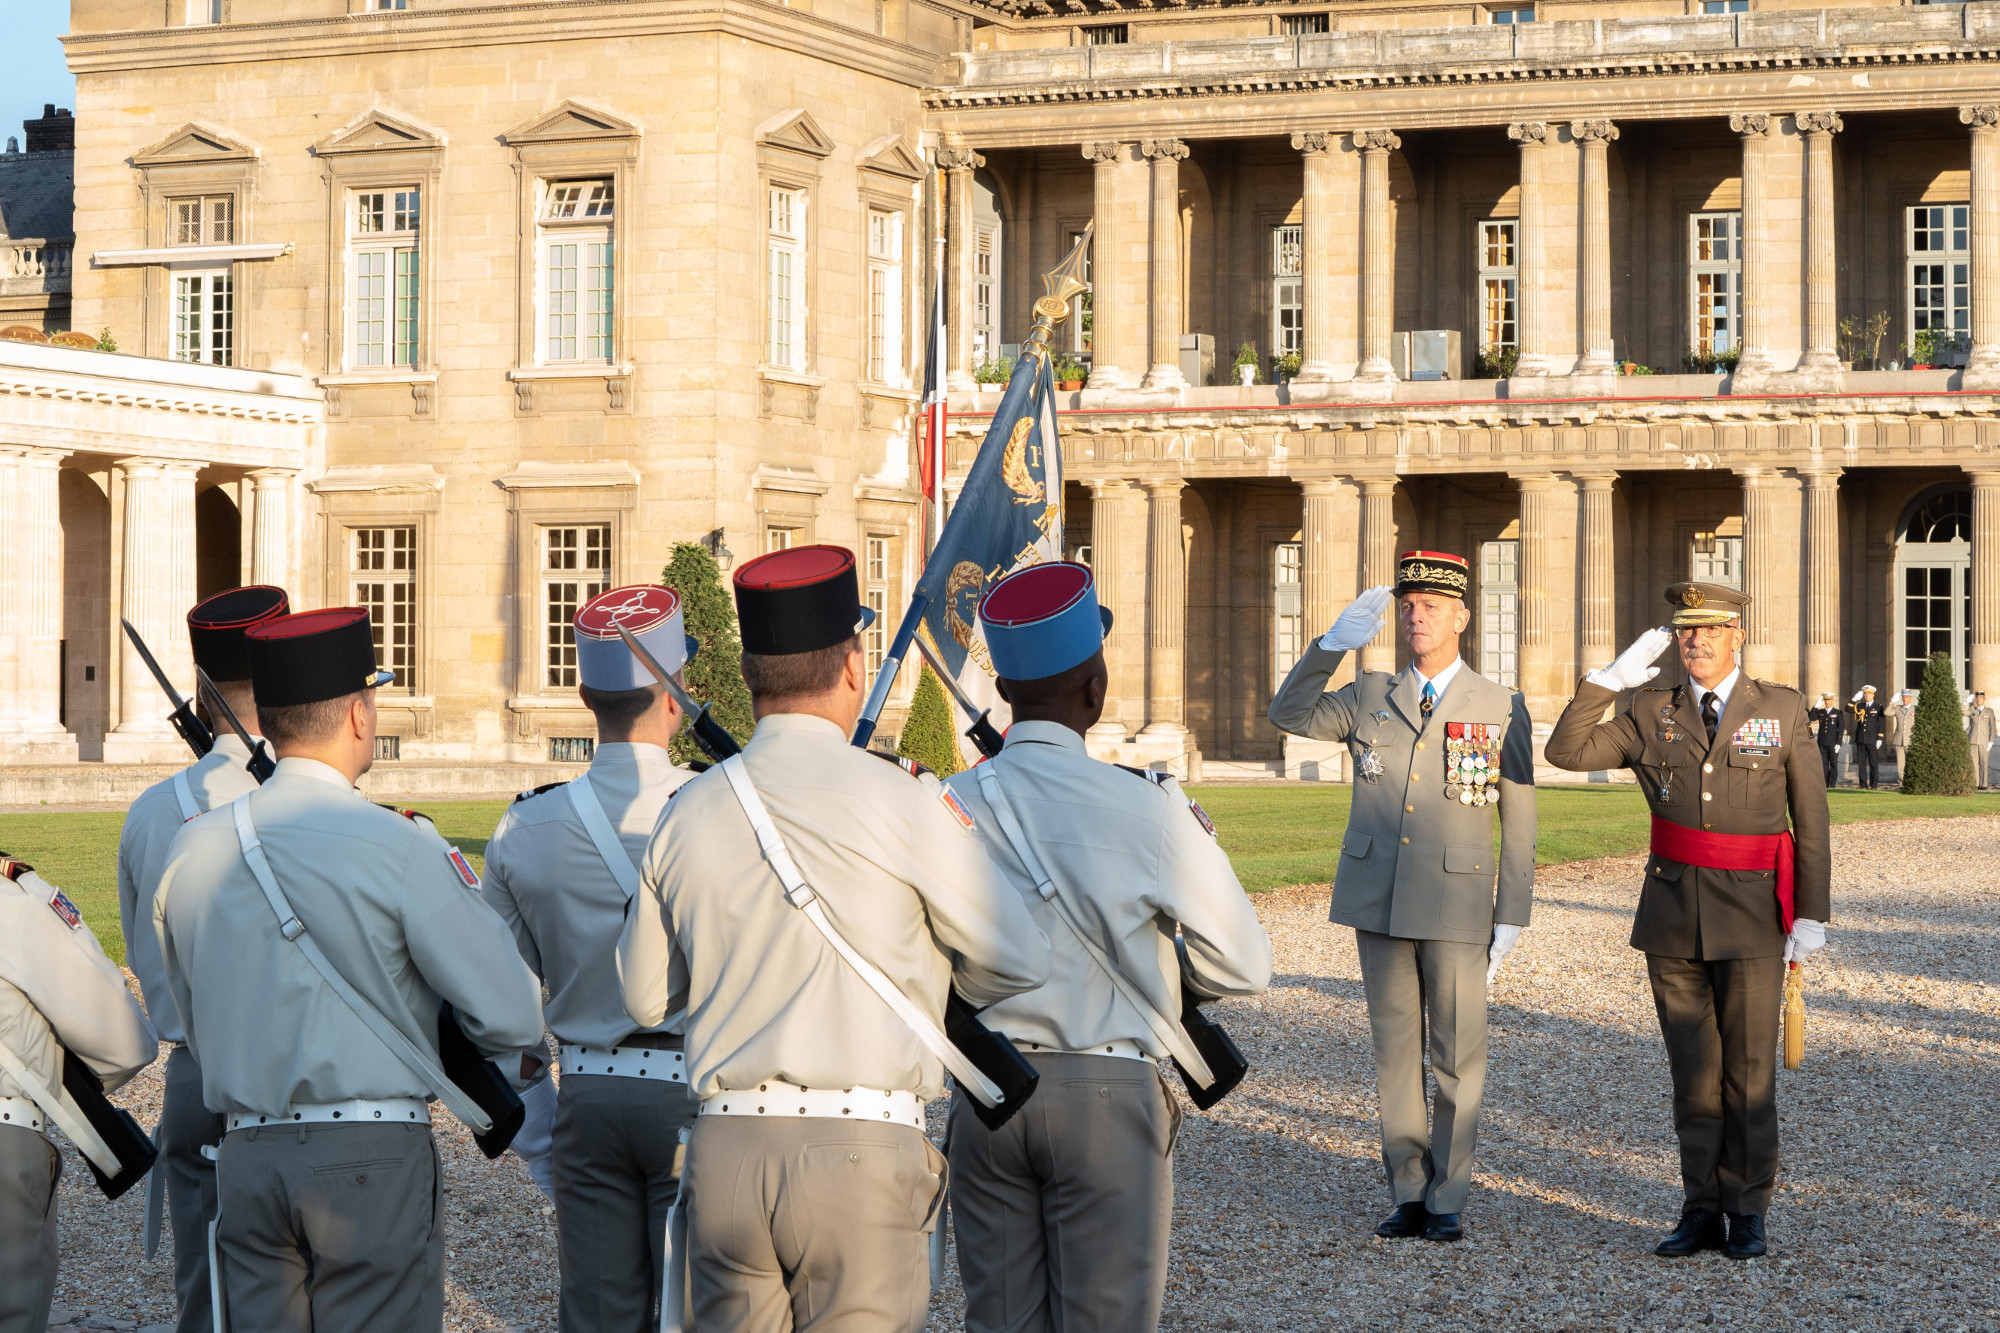 The Spanish Chief of the Defence Staff is awarded with the Legion of Honour of France